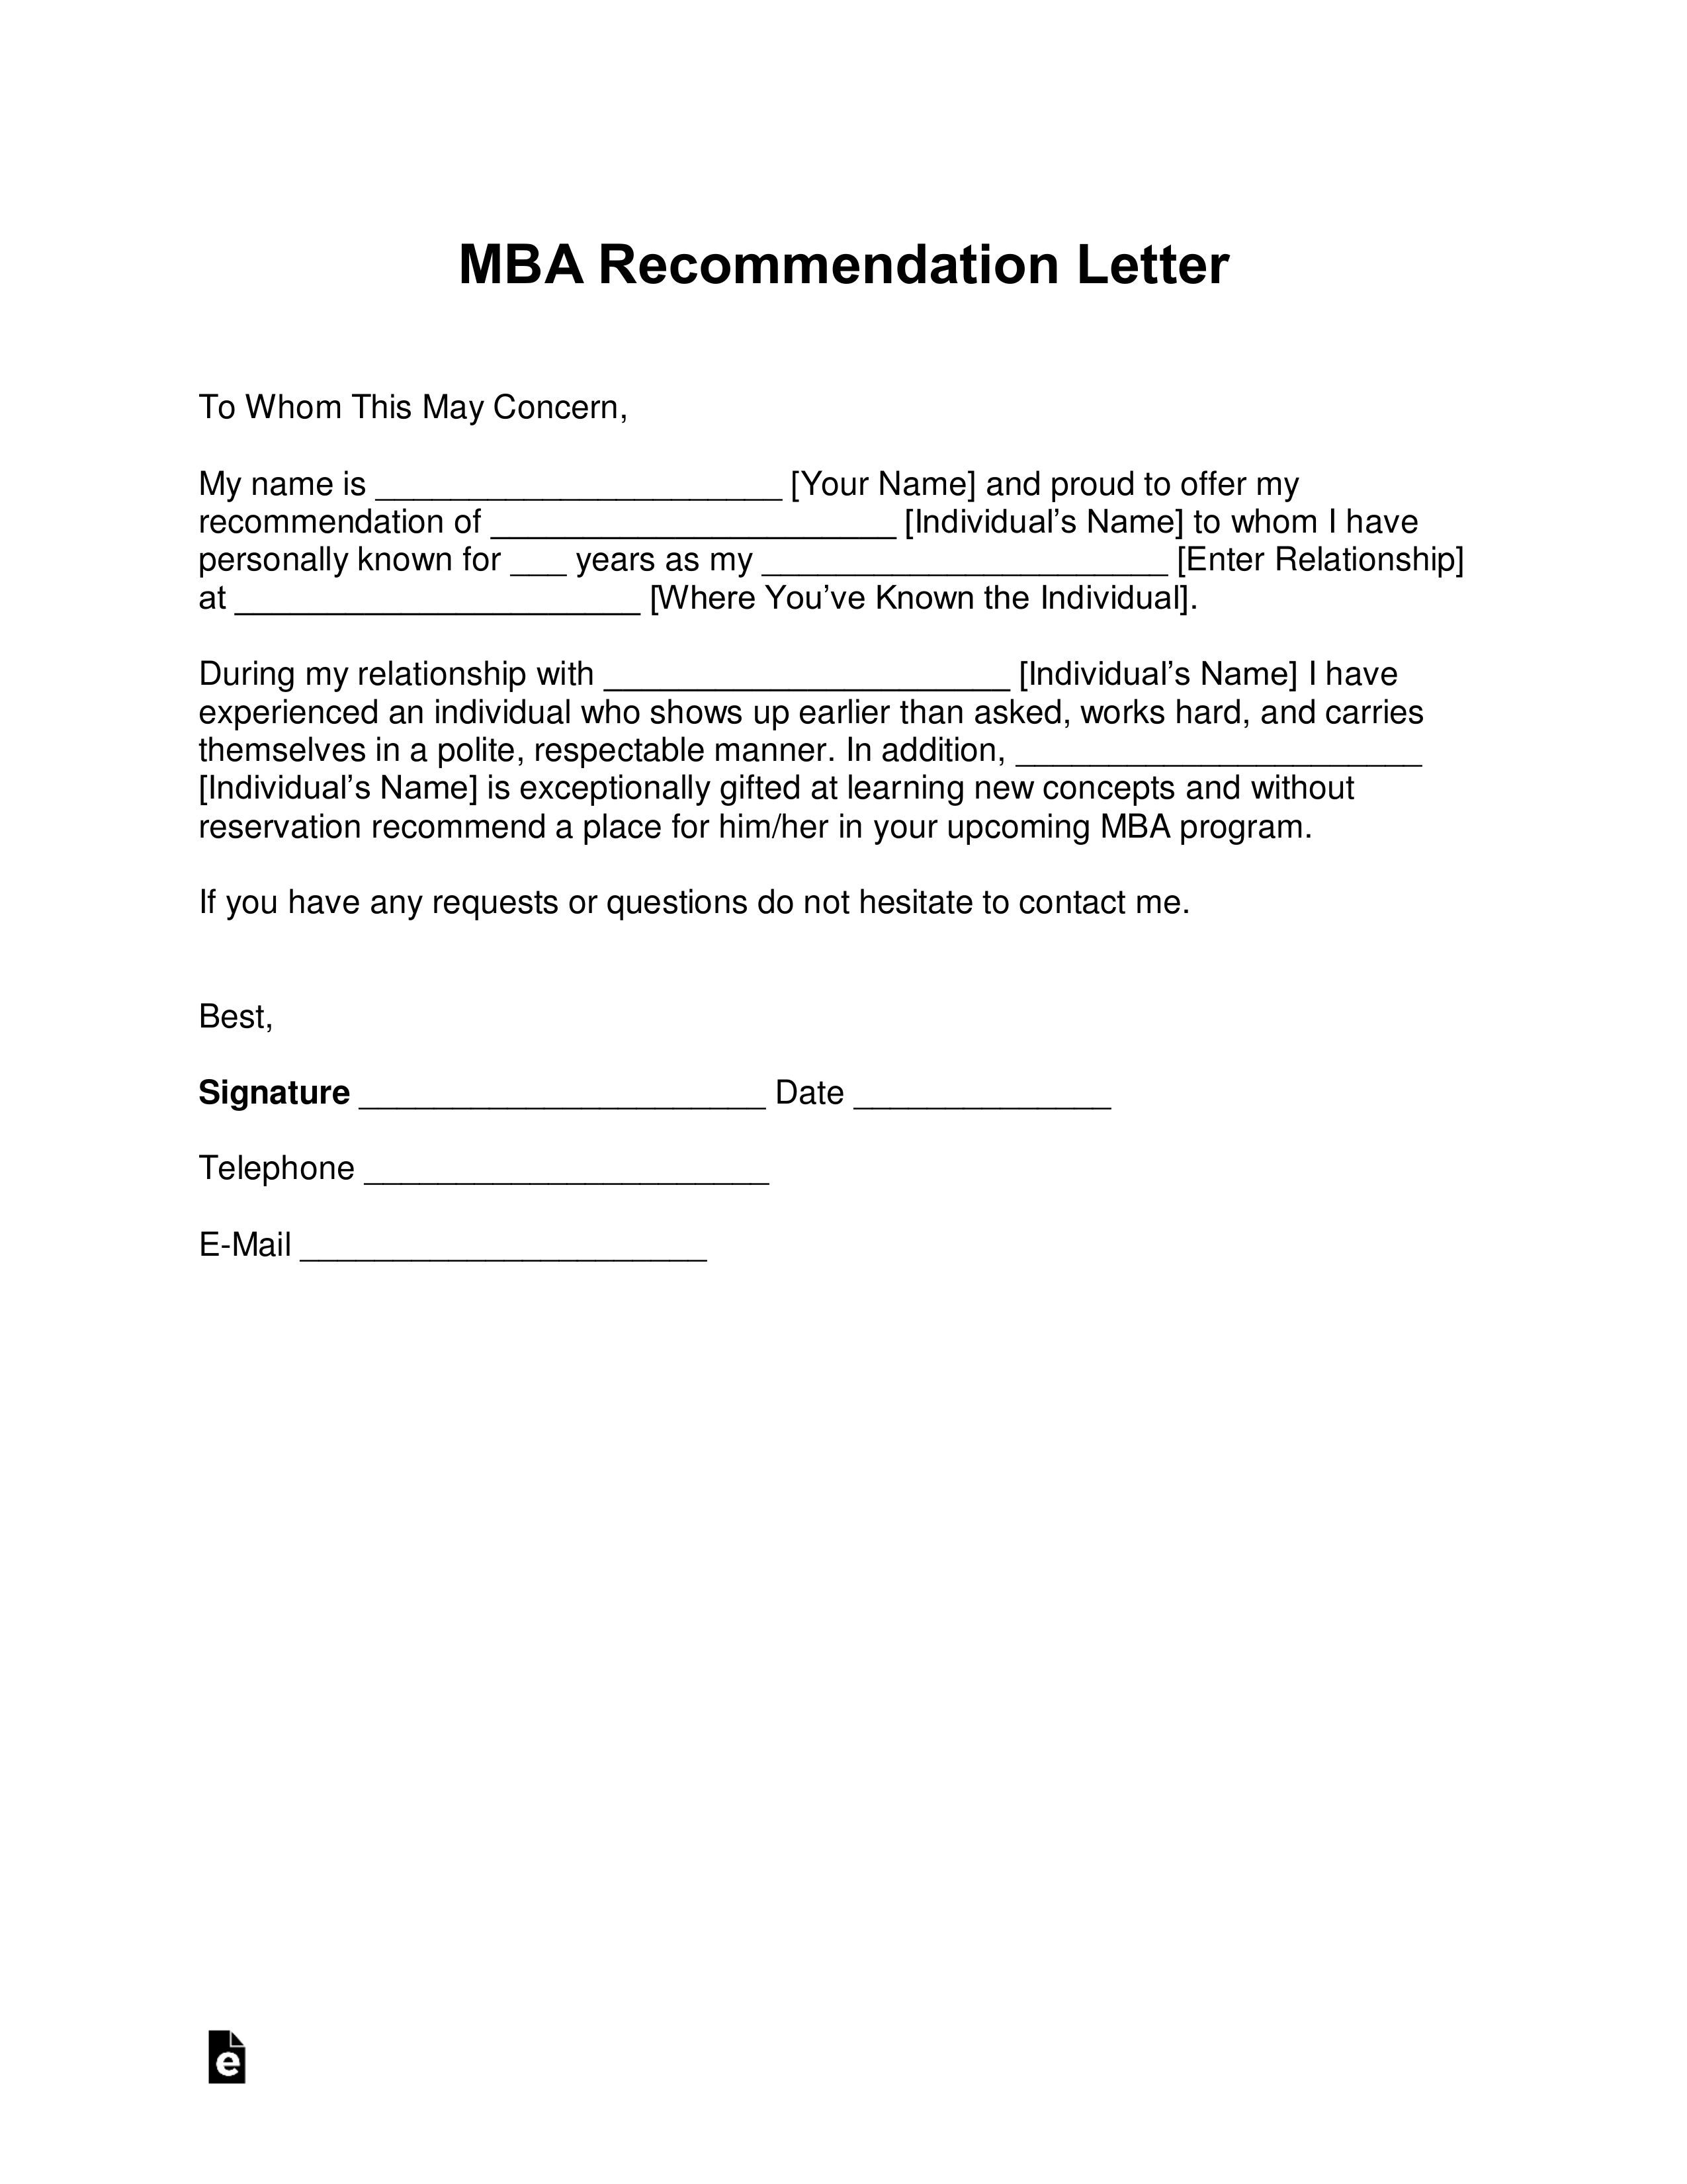 Writing A Letter Of Recommendation For An Employee from eforms.com